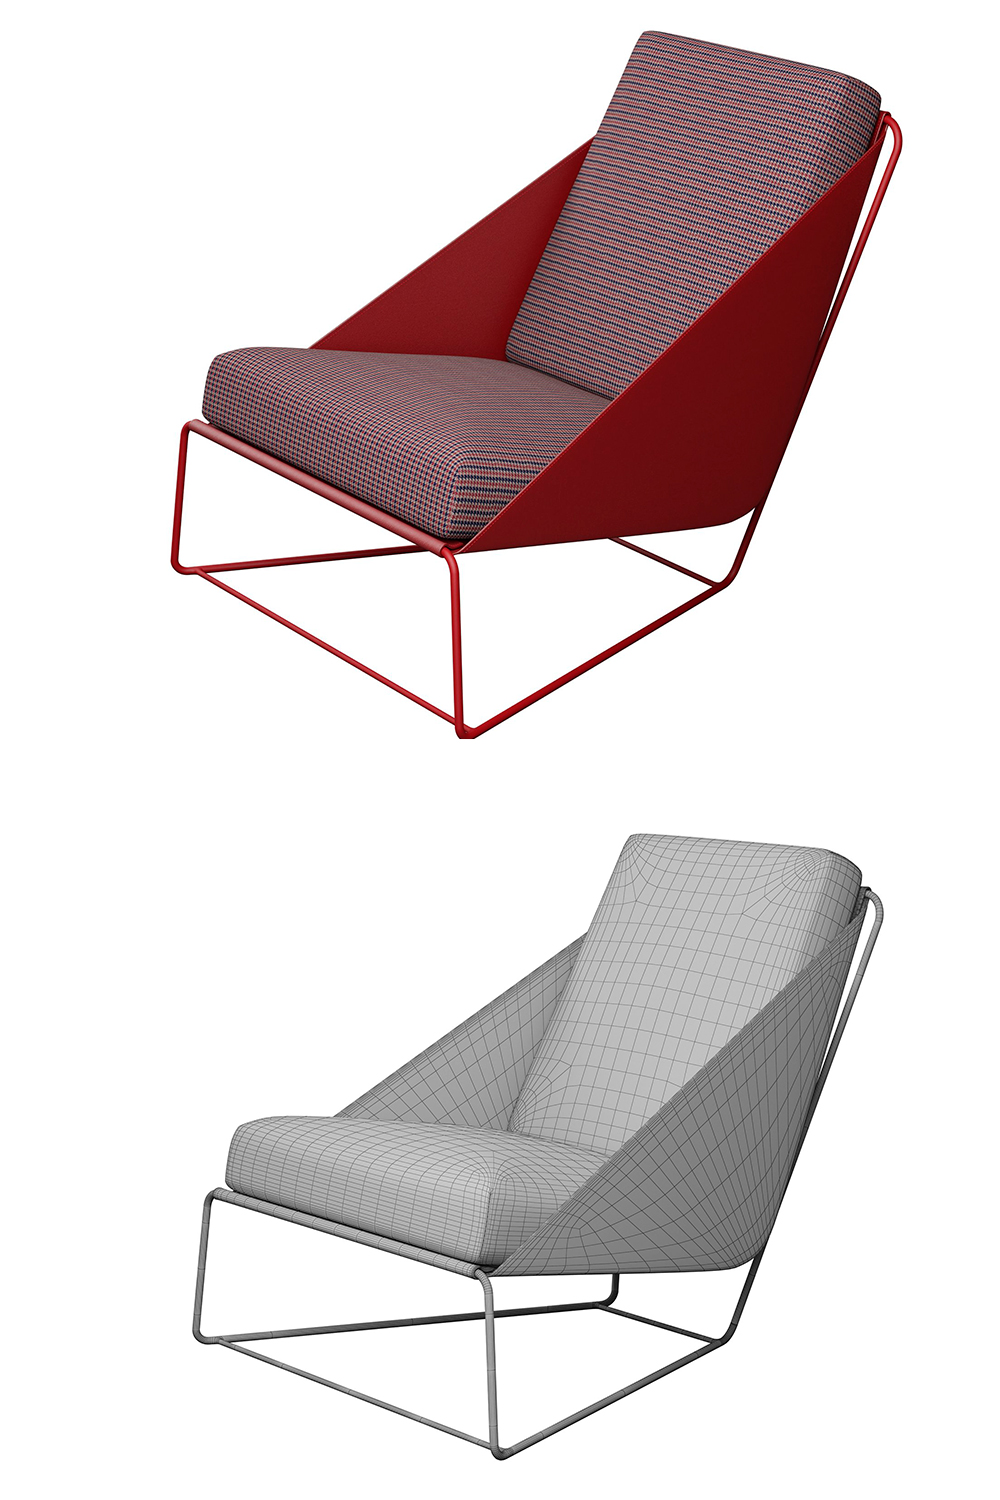 Rendering of a unique chair 3d model